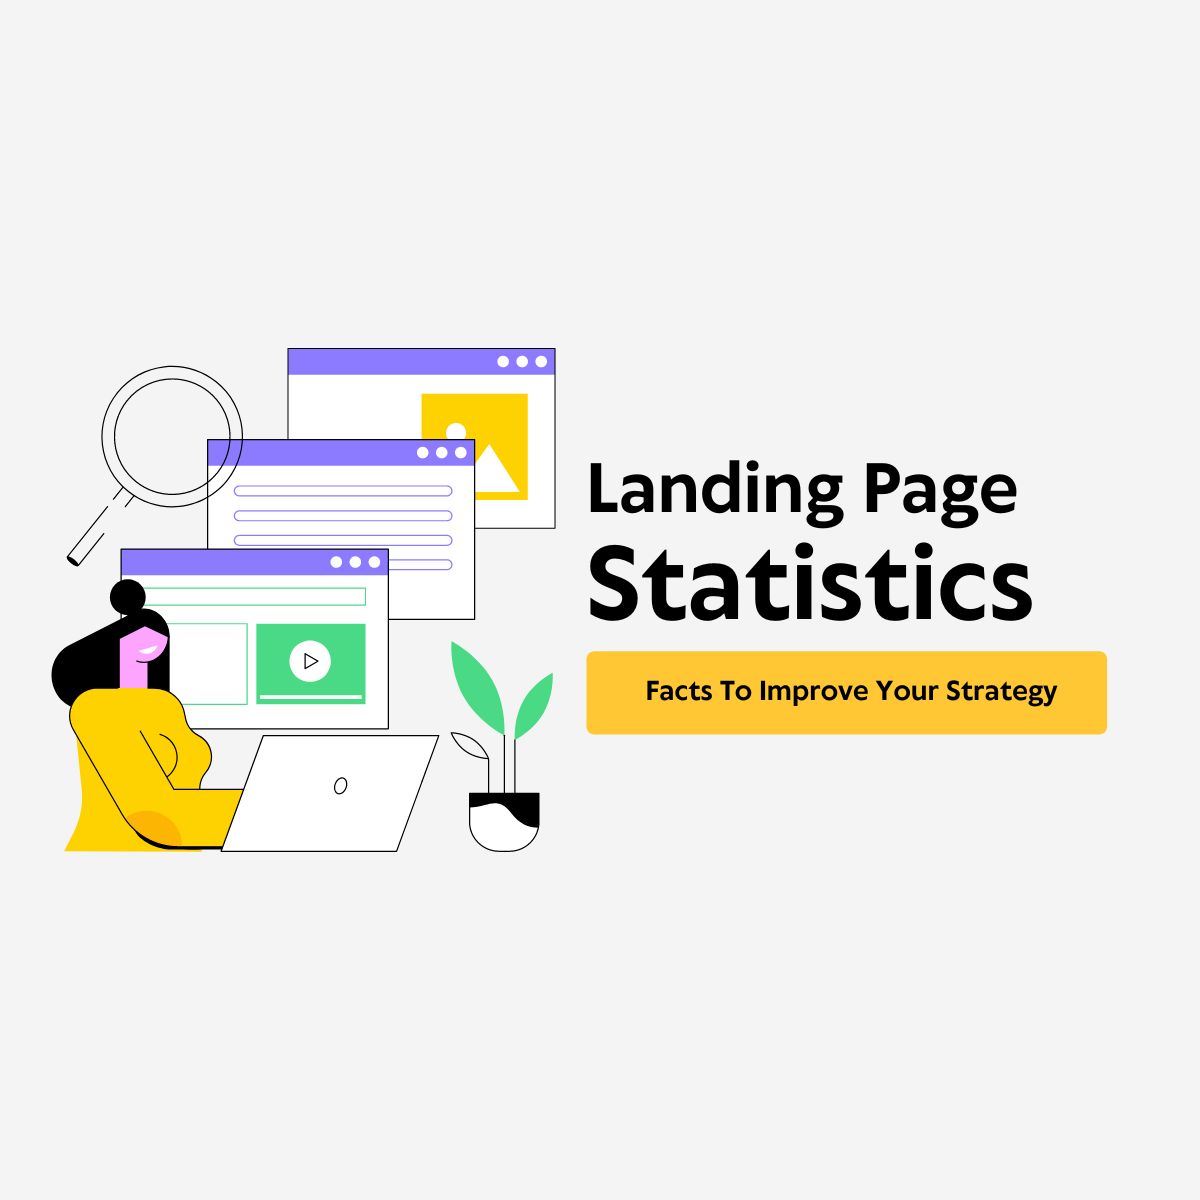 Landing Page Statistics 2022 – Facts To Improve Your Strategy